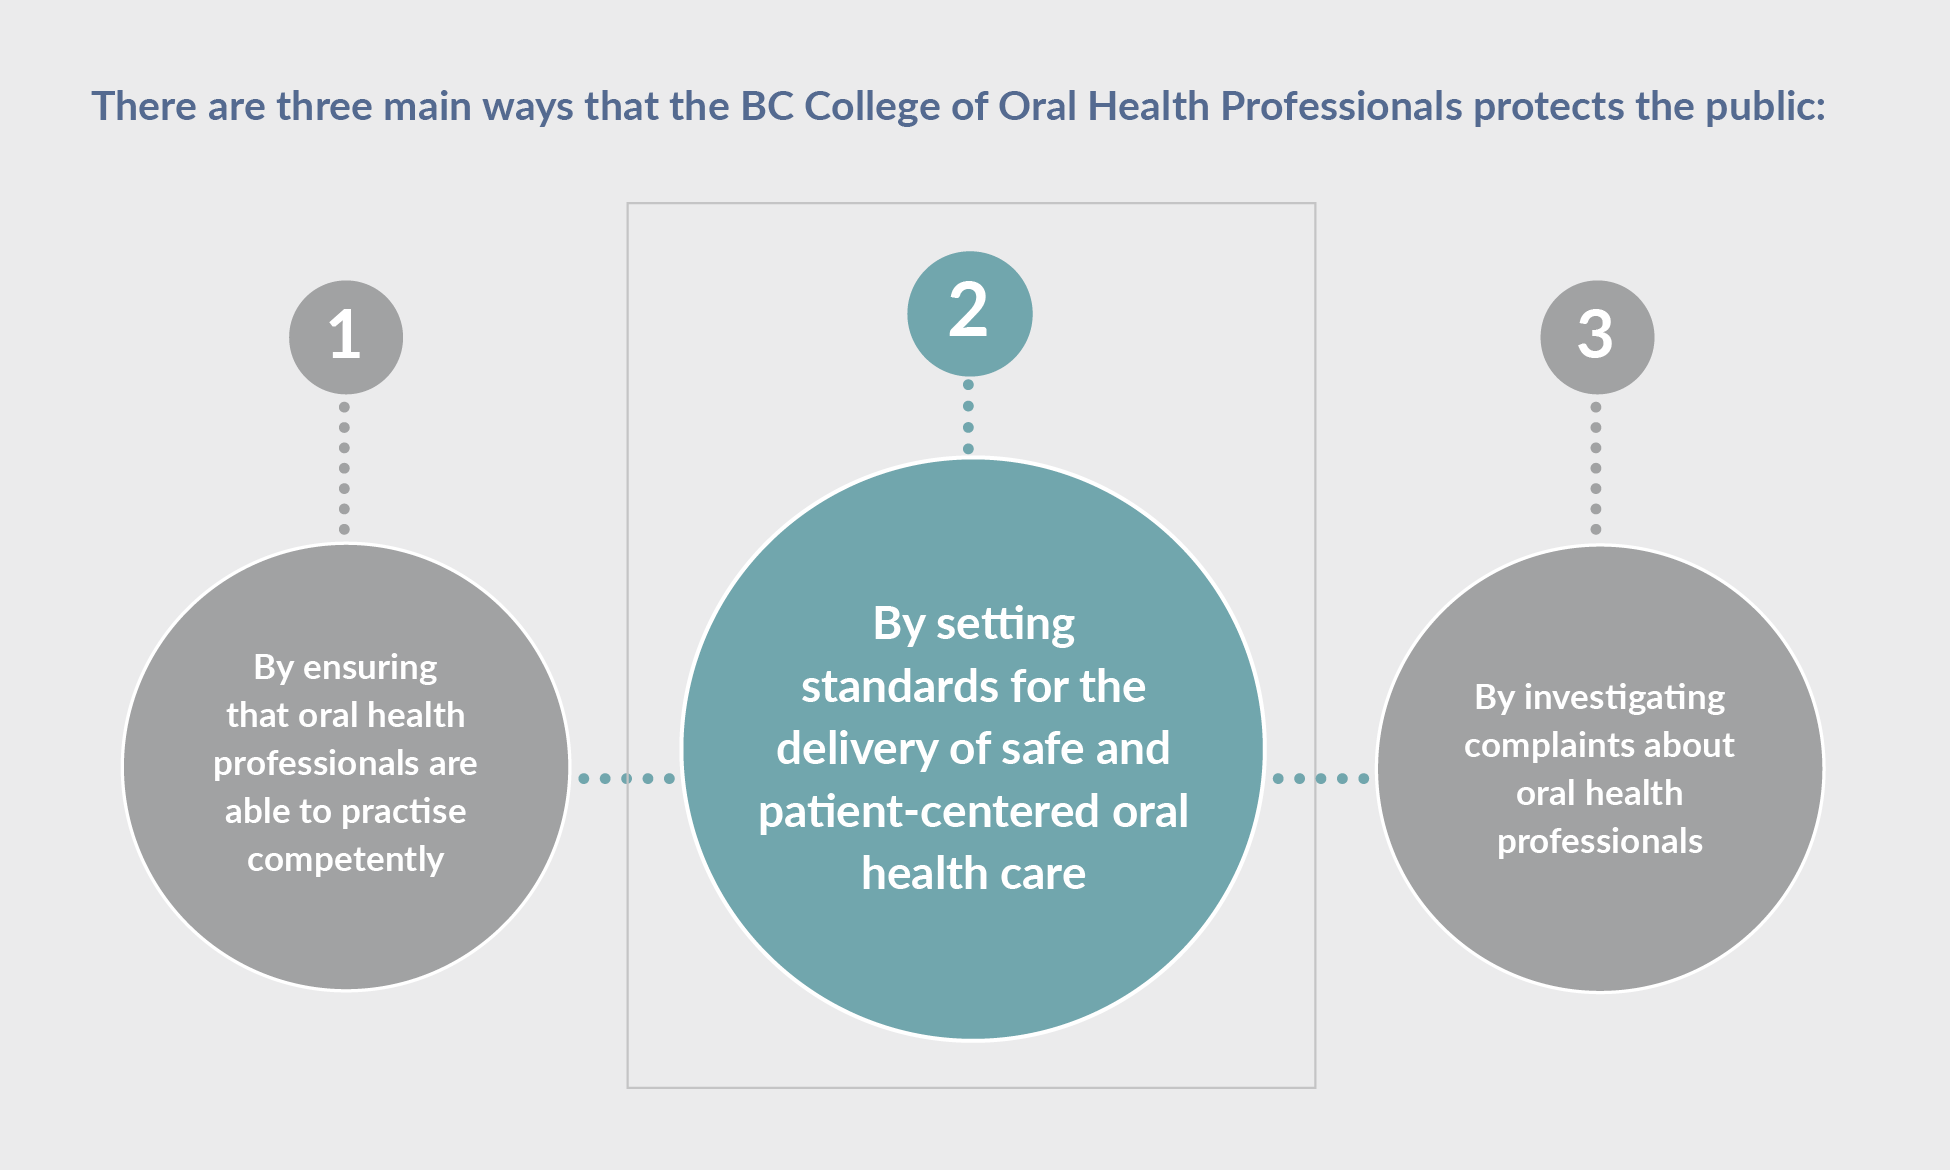 There are three main ways that the BC College of Oral health Professionals protects the public: 1. By ensuring that oral health professionals are able to practise competently. 2. By setting standards for the delivery of safe and patient-centered oral health care. 3. By investigating complaints about oral health professionals.